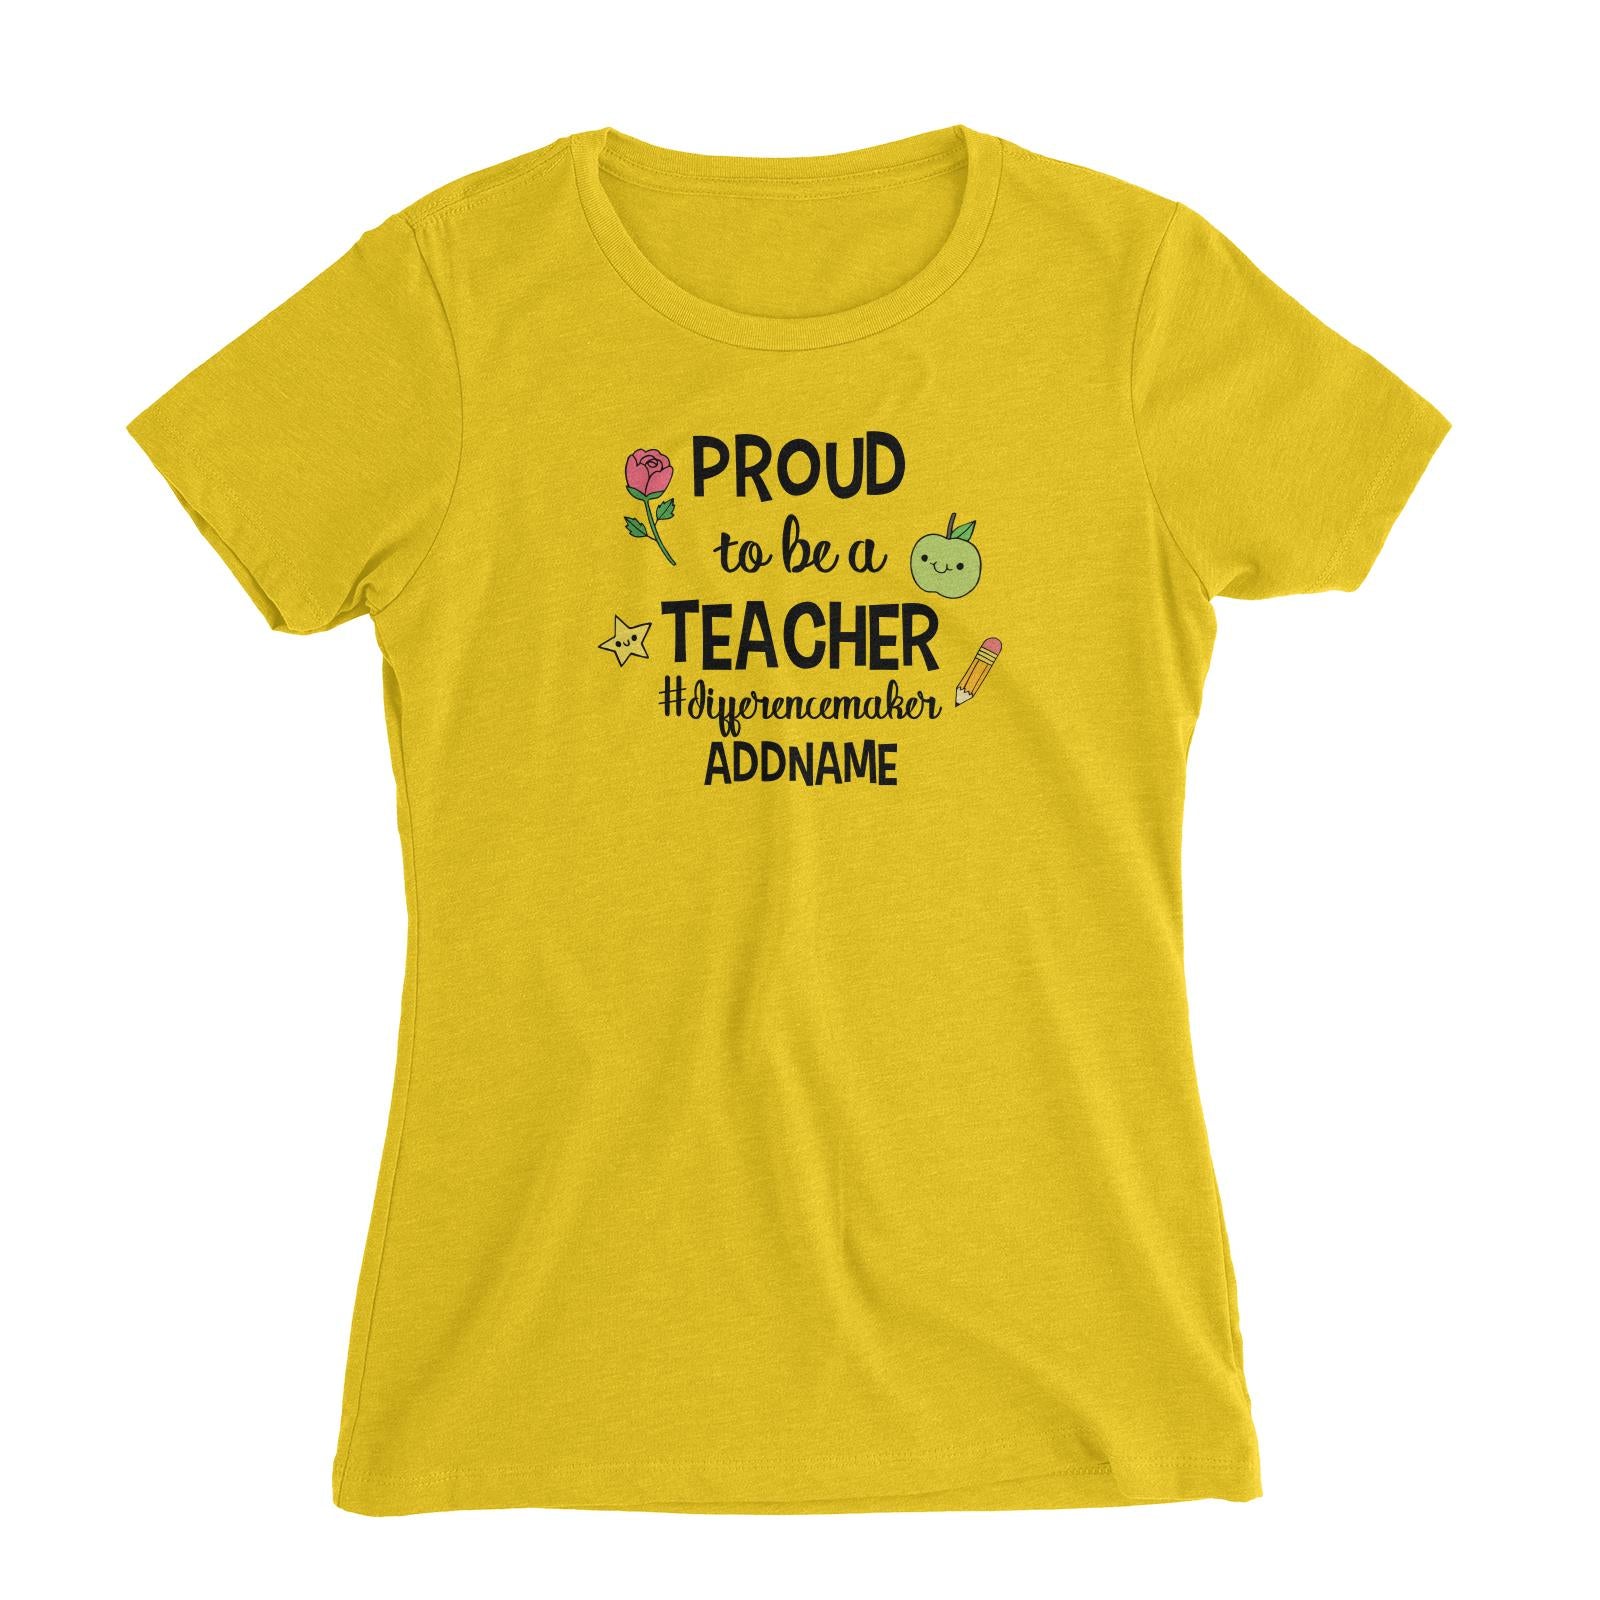 Doodle Series - Proud To Be A Teacher #differencemaker Women's Slim Fit T-Shirt